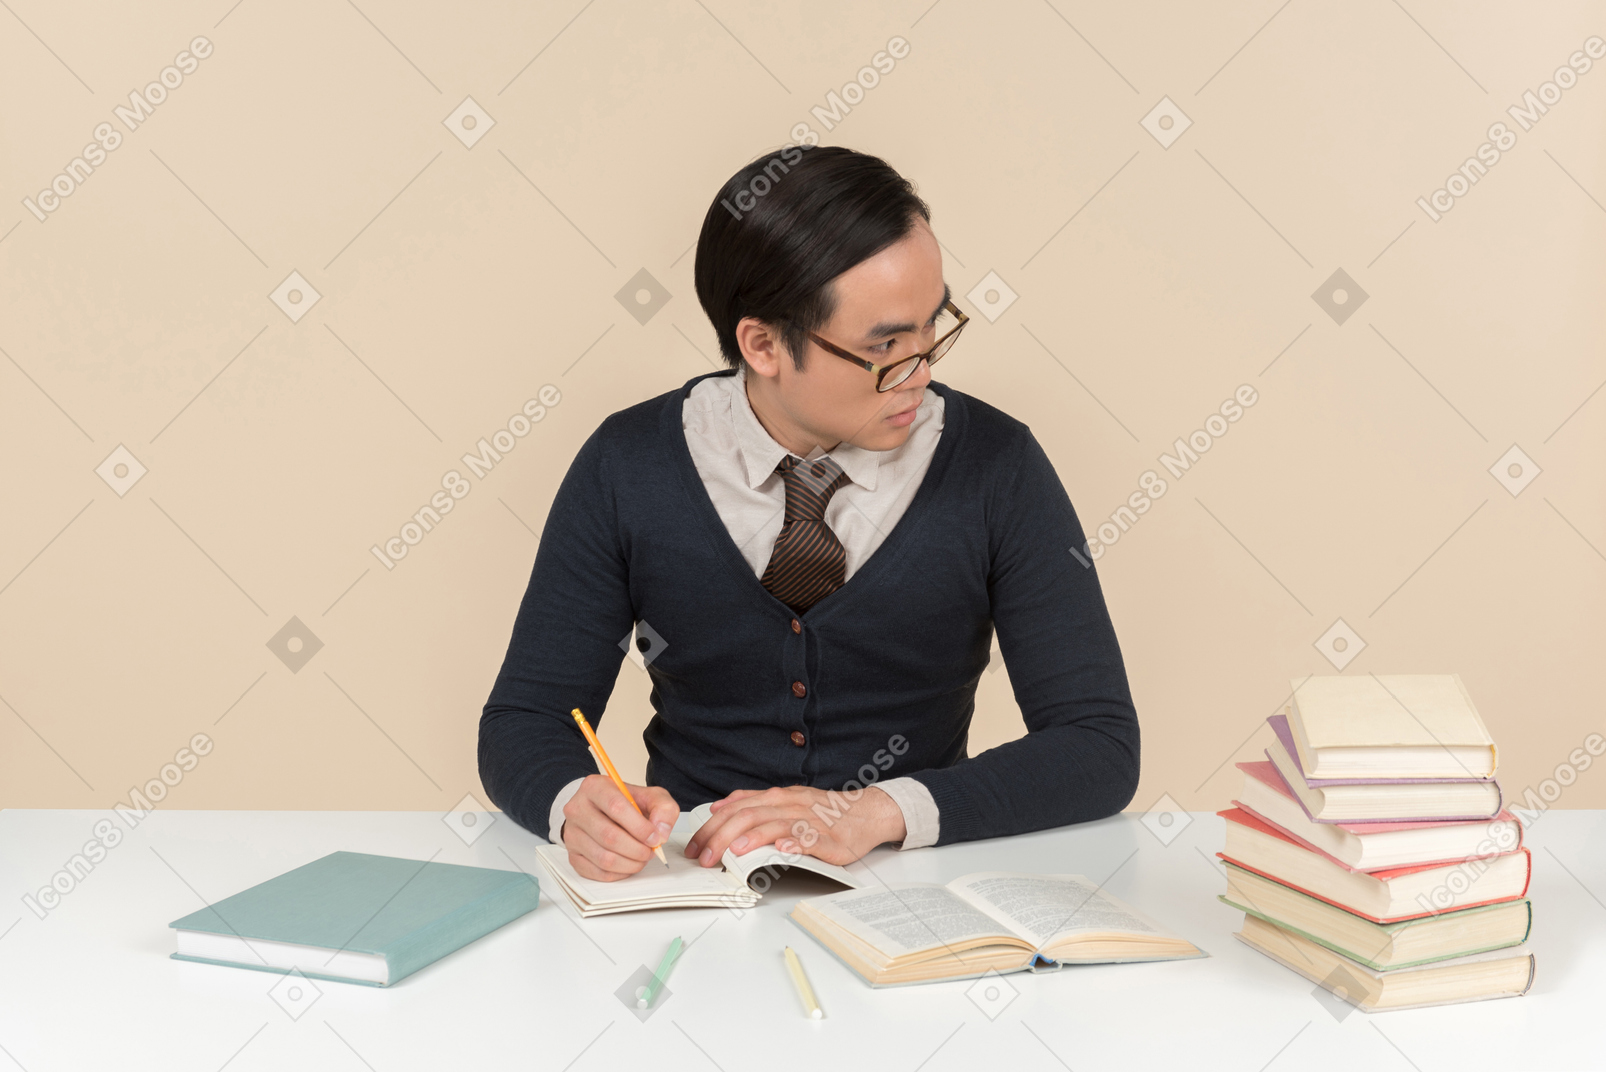 Young asian student in a sweater writing in a notebook